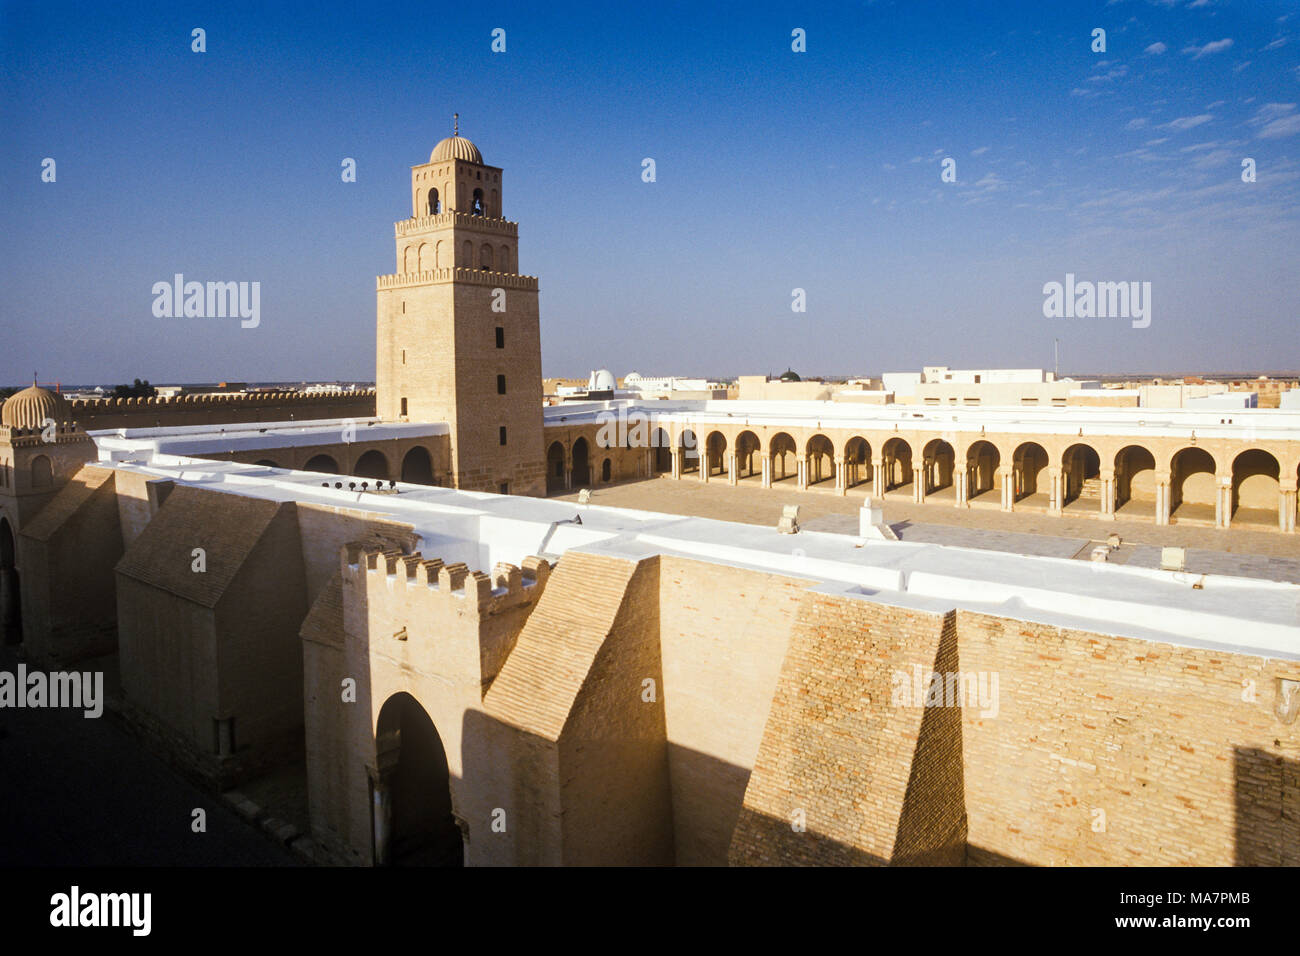 The Great Mosque of Kairouan (Mosque of Uqba) is one of the most important mosques in Tunisia Stock Photo